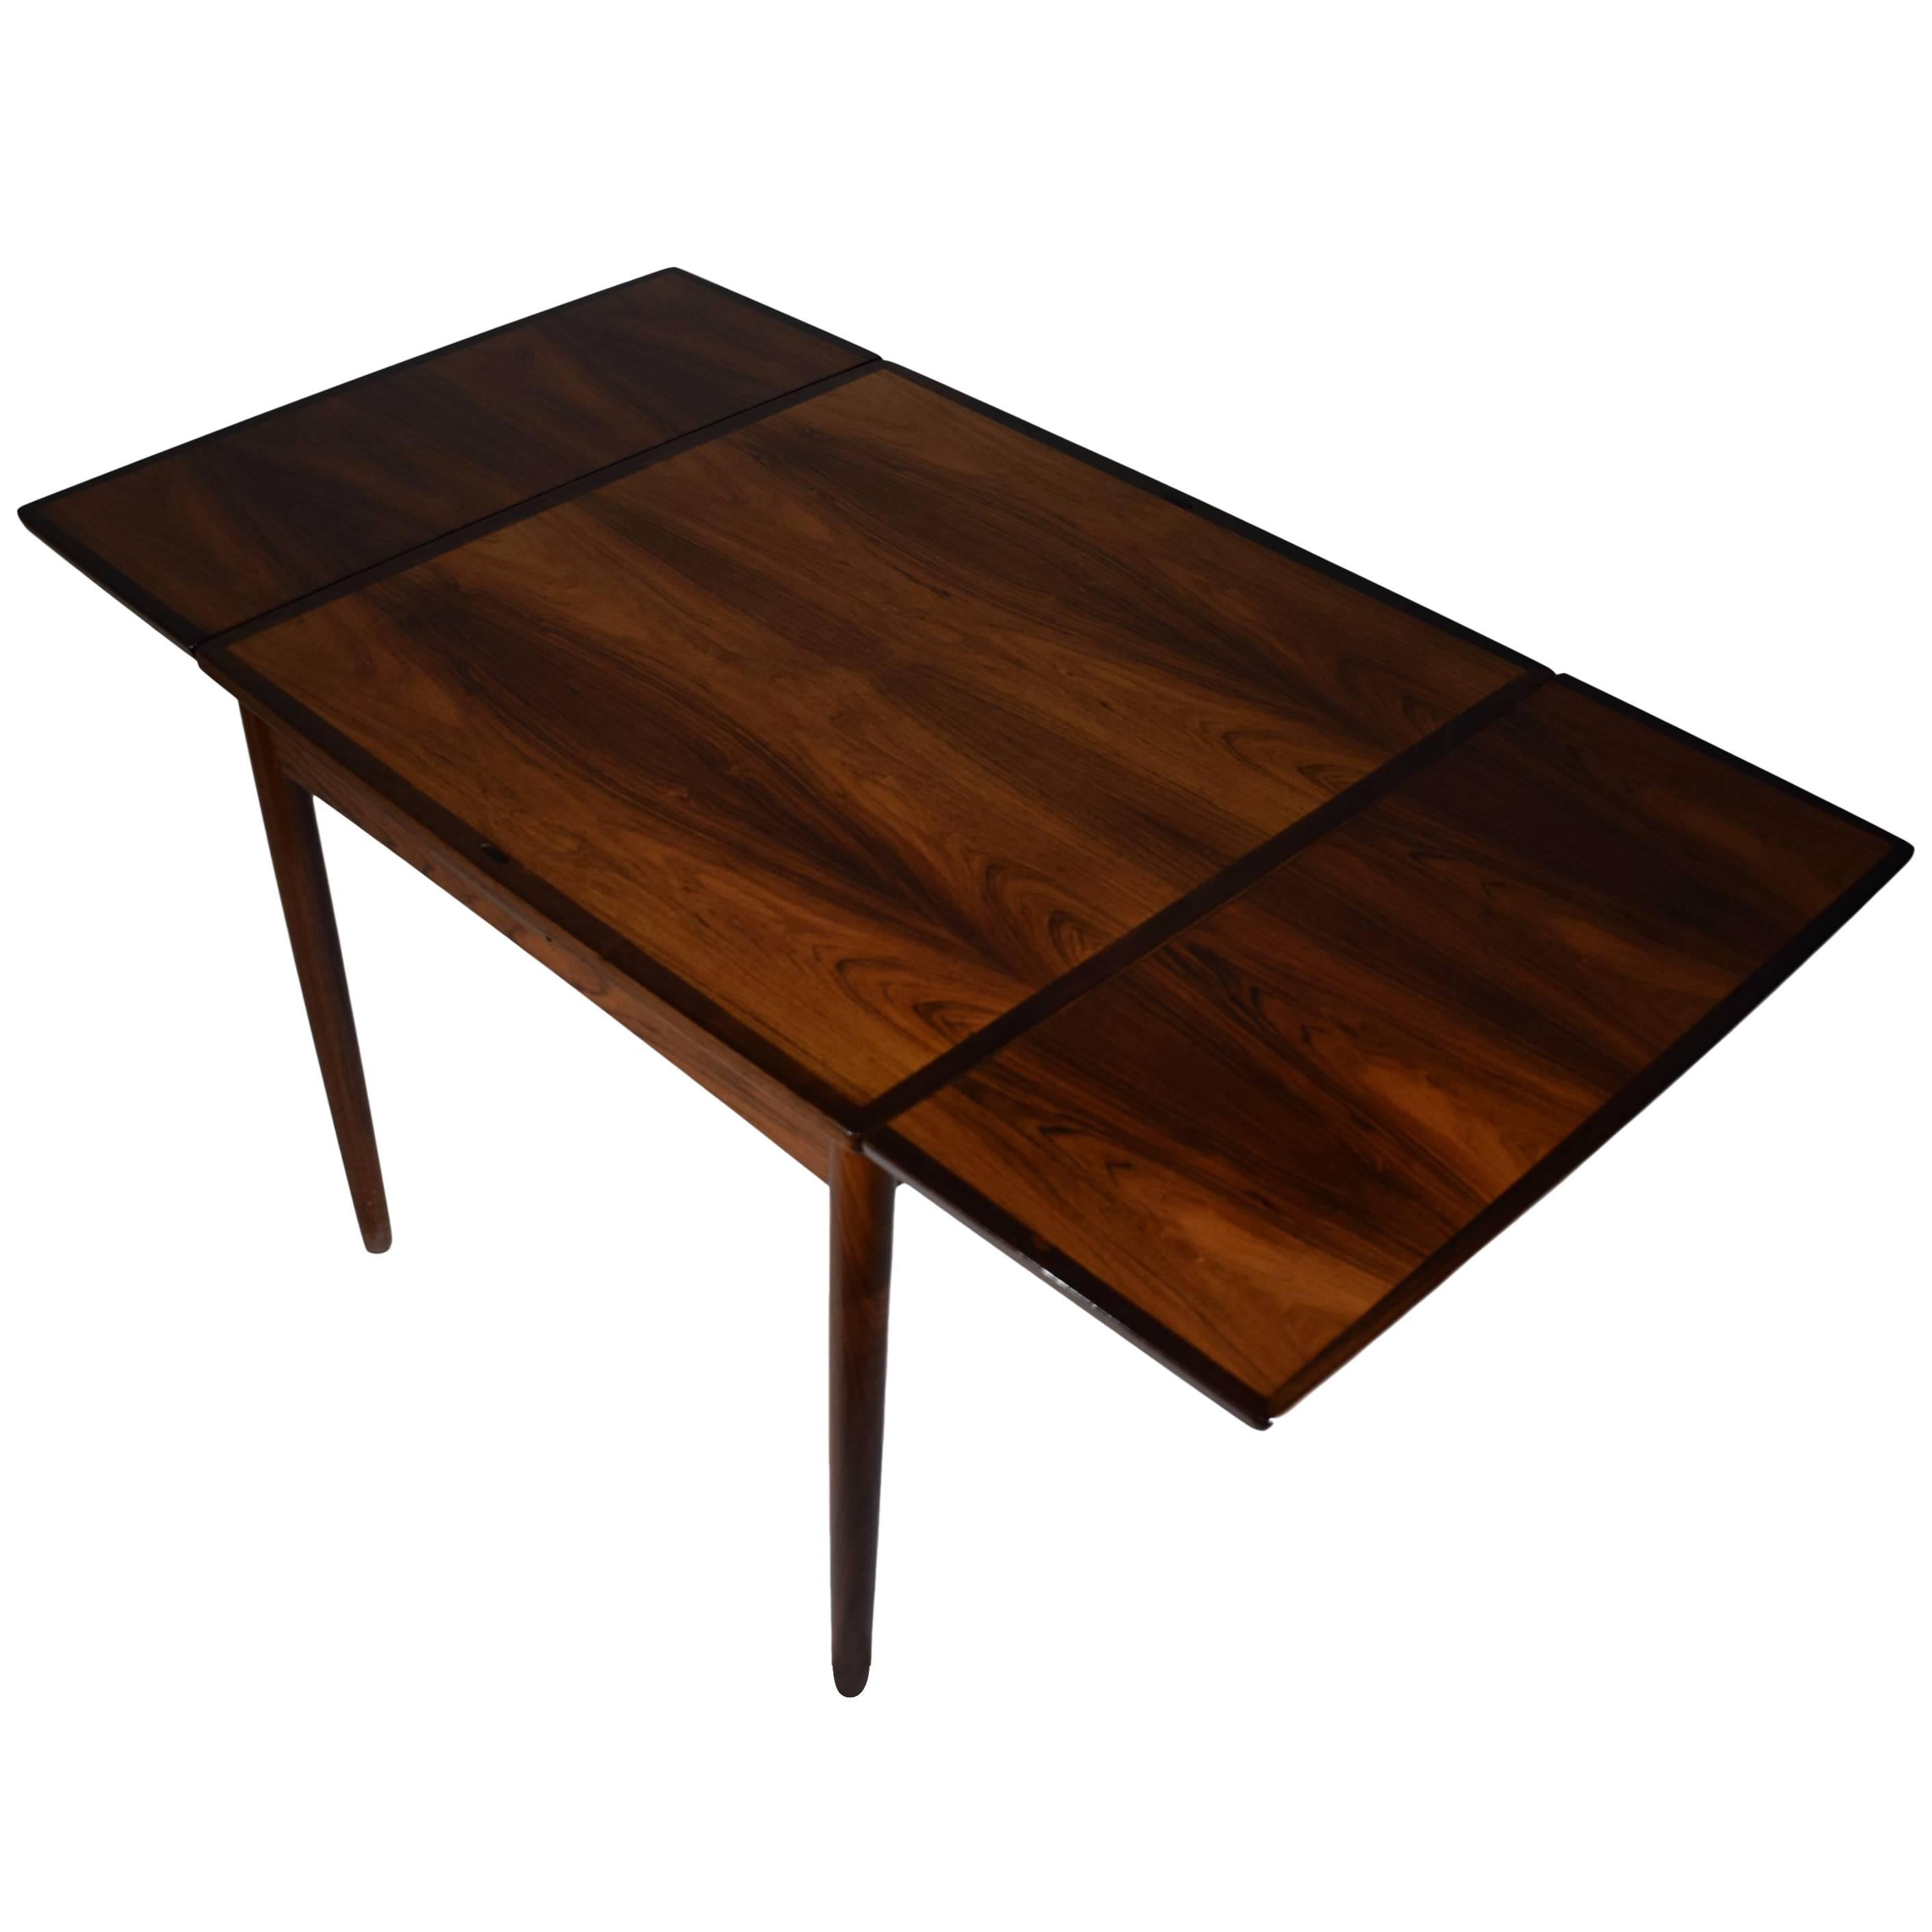 A Danish midcentury games table / dining table by Poul Hundevad (1917-2011). Reversible tabletop covered with black leather on the backside. Two extension leaves. Rosewood veneer and tapered solid rosewood legs. 

Measure: W 80-140 cm.
 